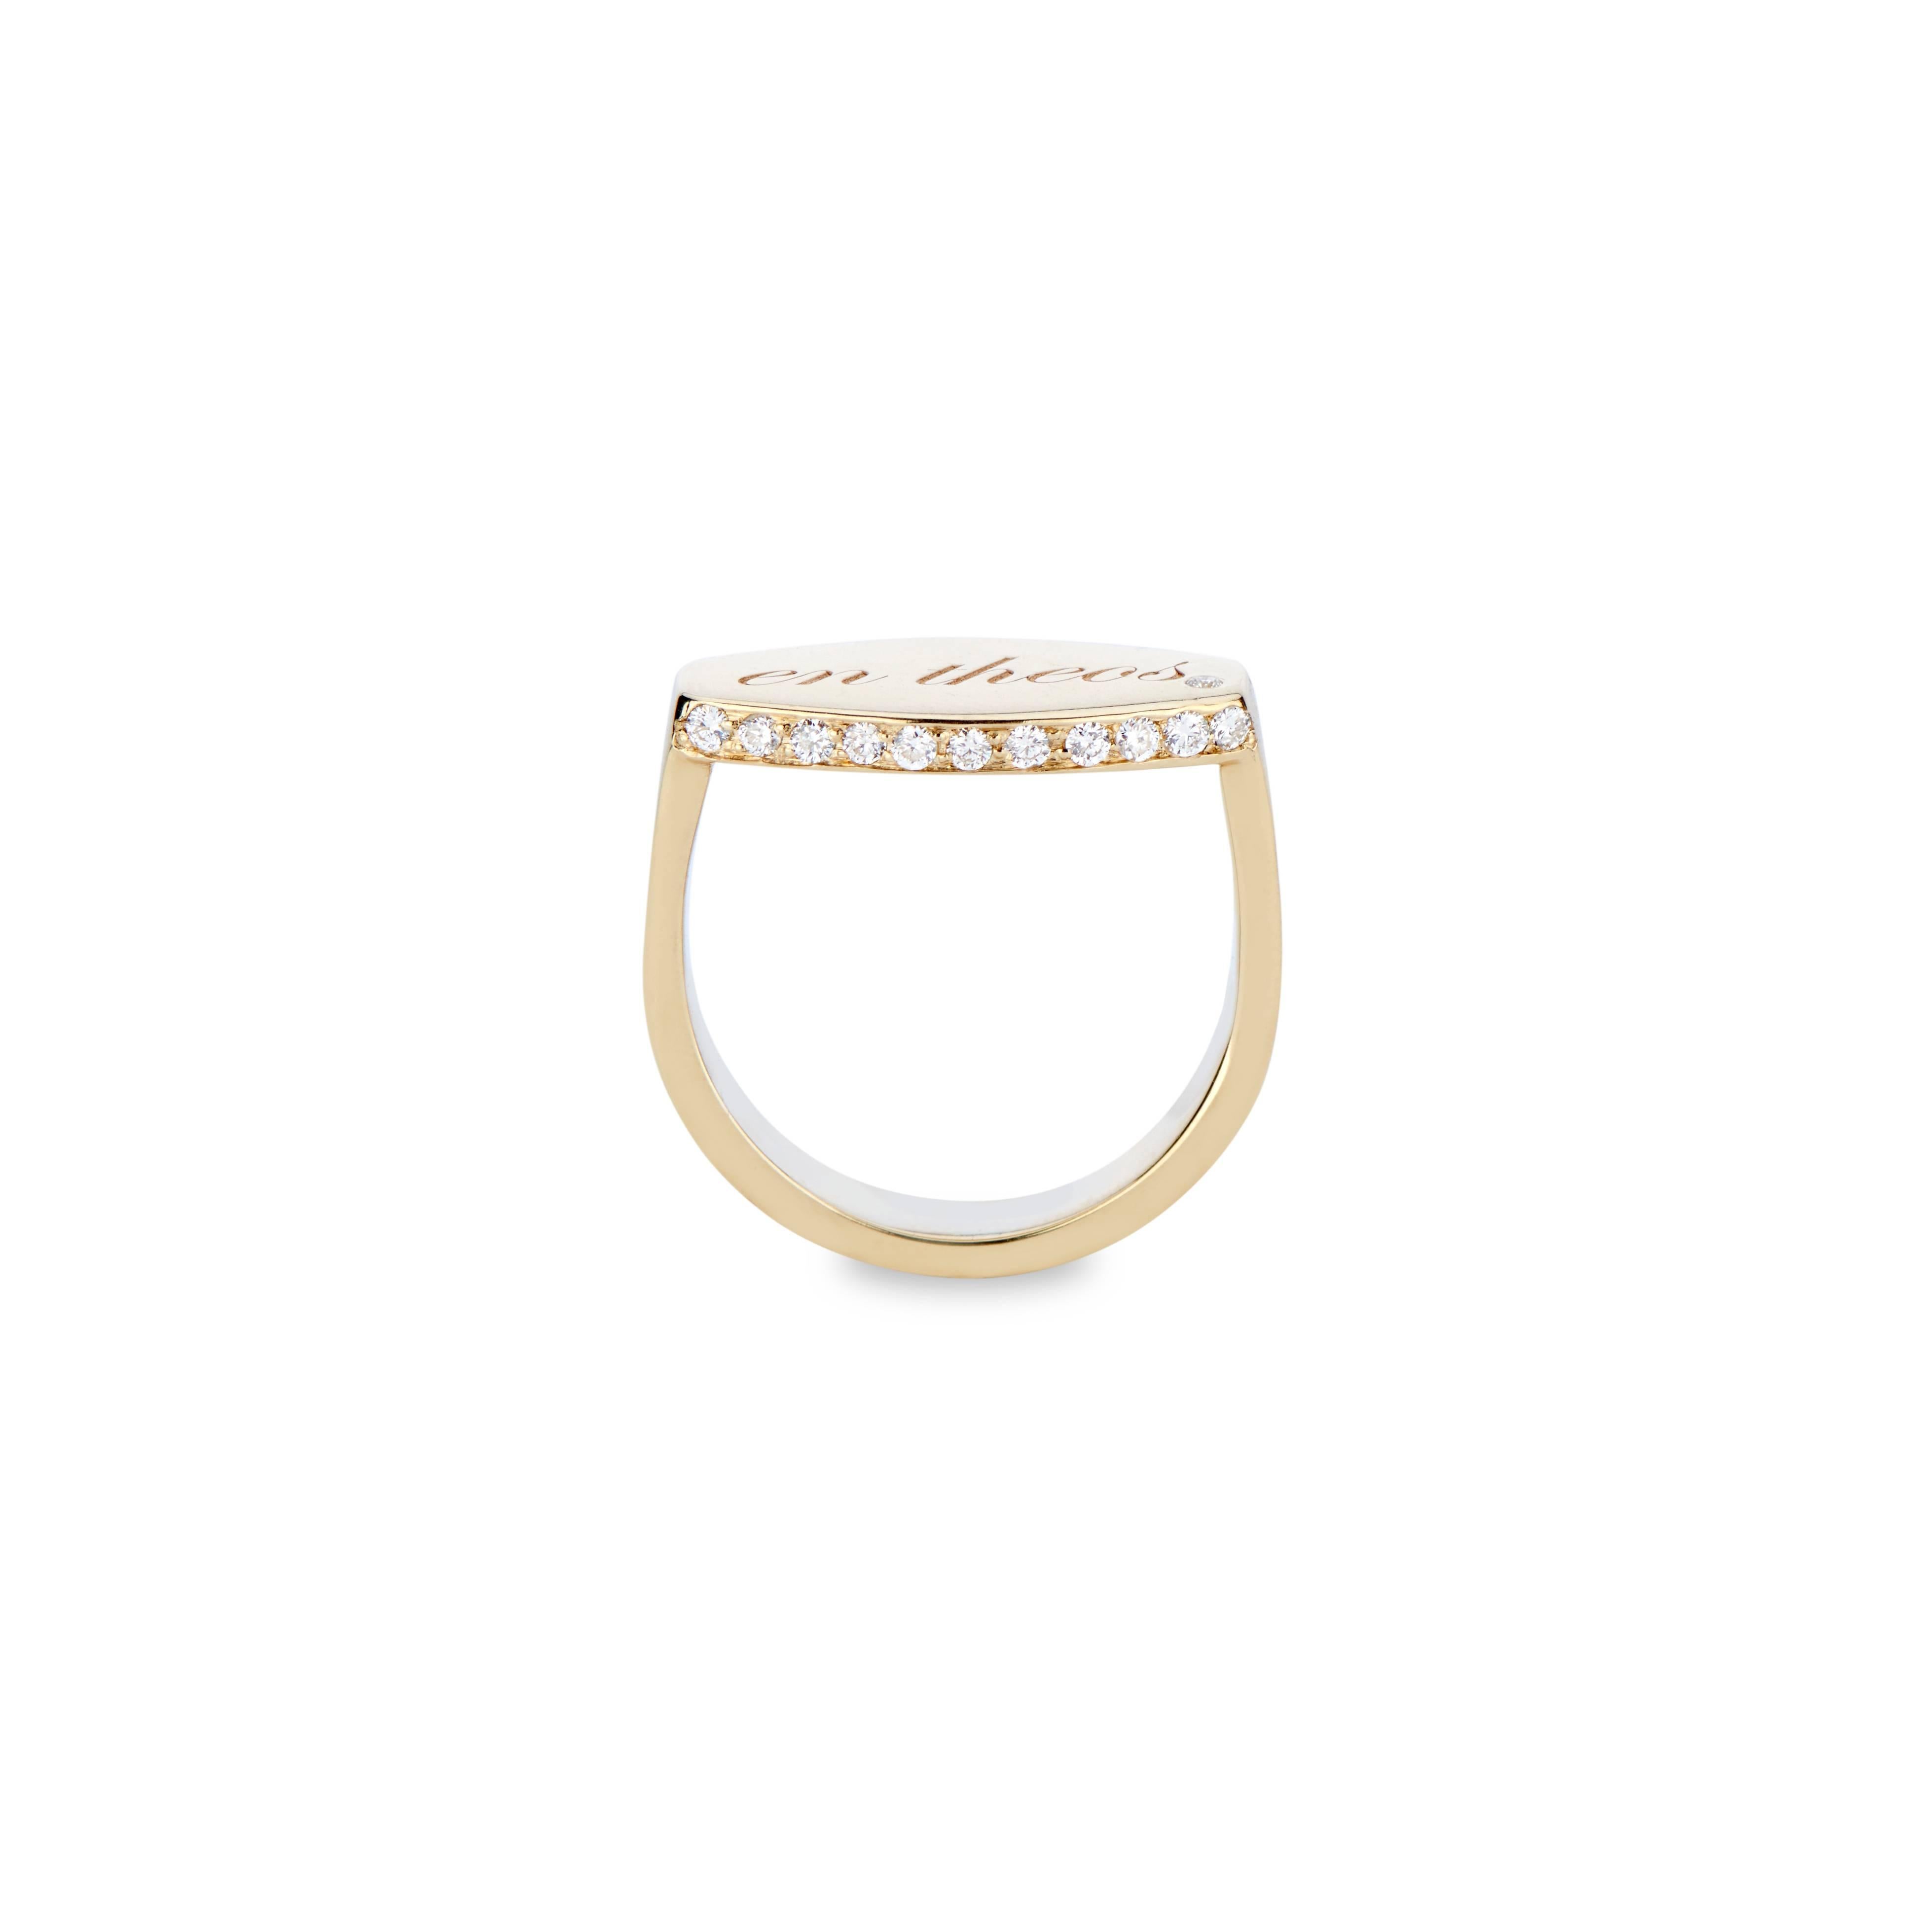 Wear this 14k yellow gold and white diamond signet ring as a reminder of the power of exuberance.  